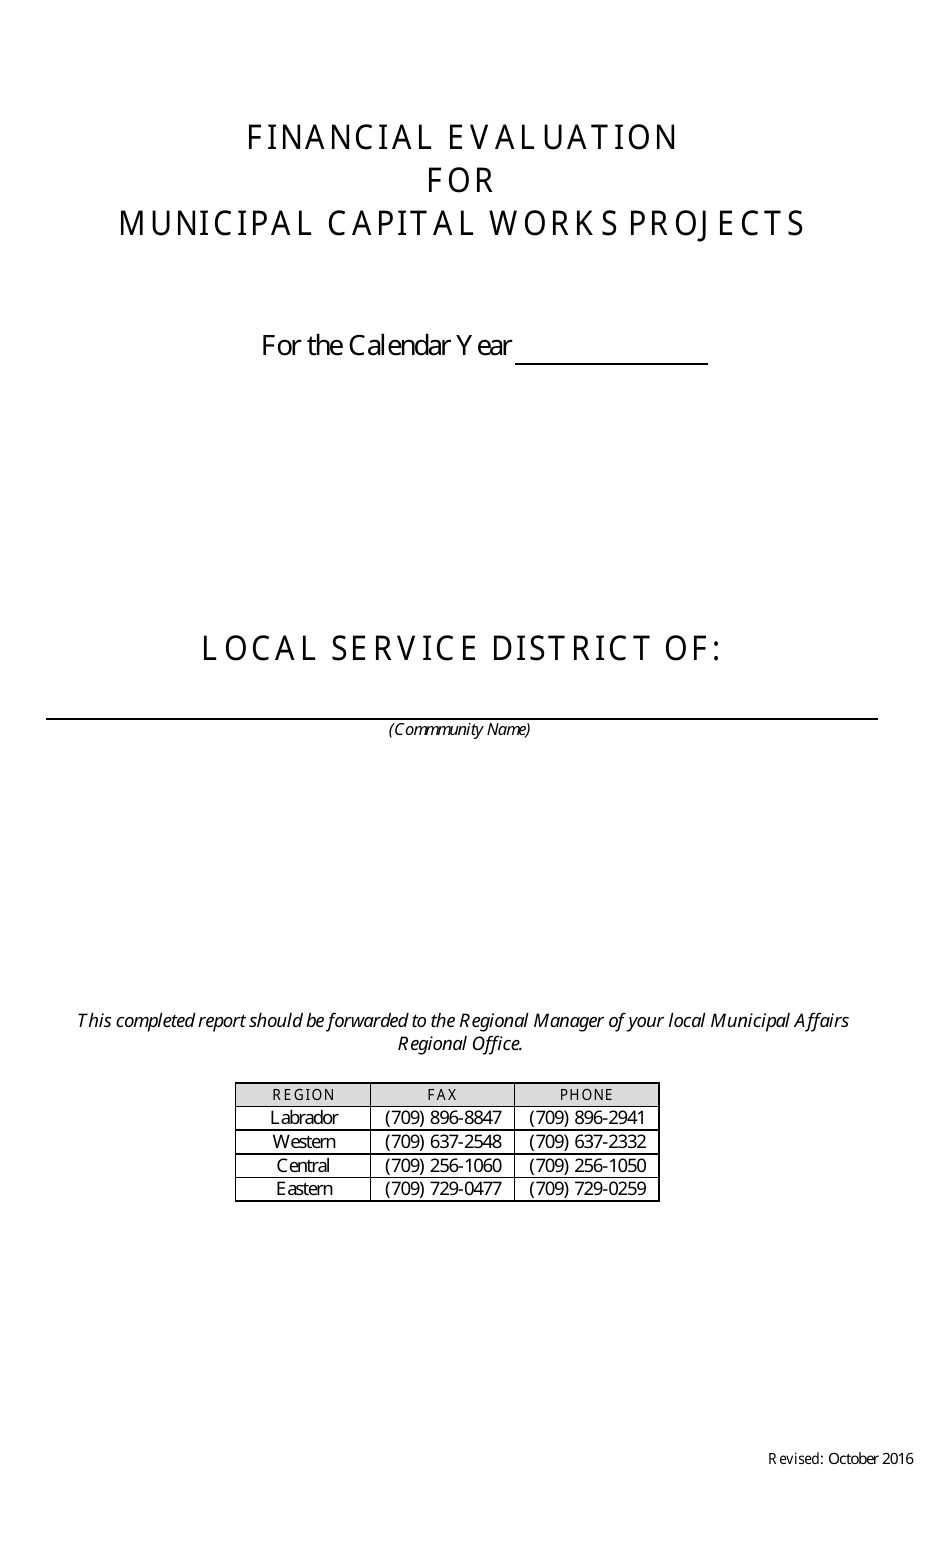 Financial Evaluation Form for Local Service Districts - Newfoundland and Labrador, Canada, Page 1